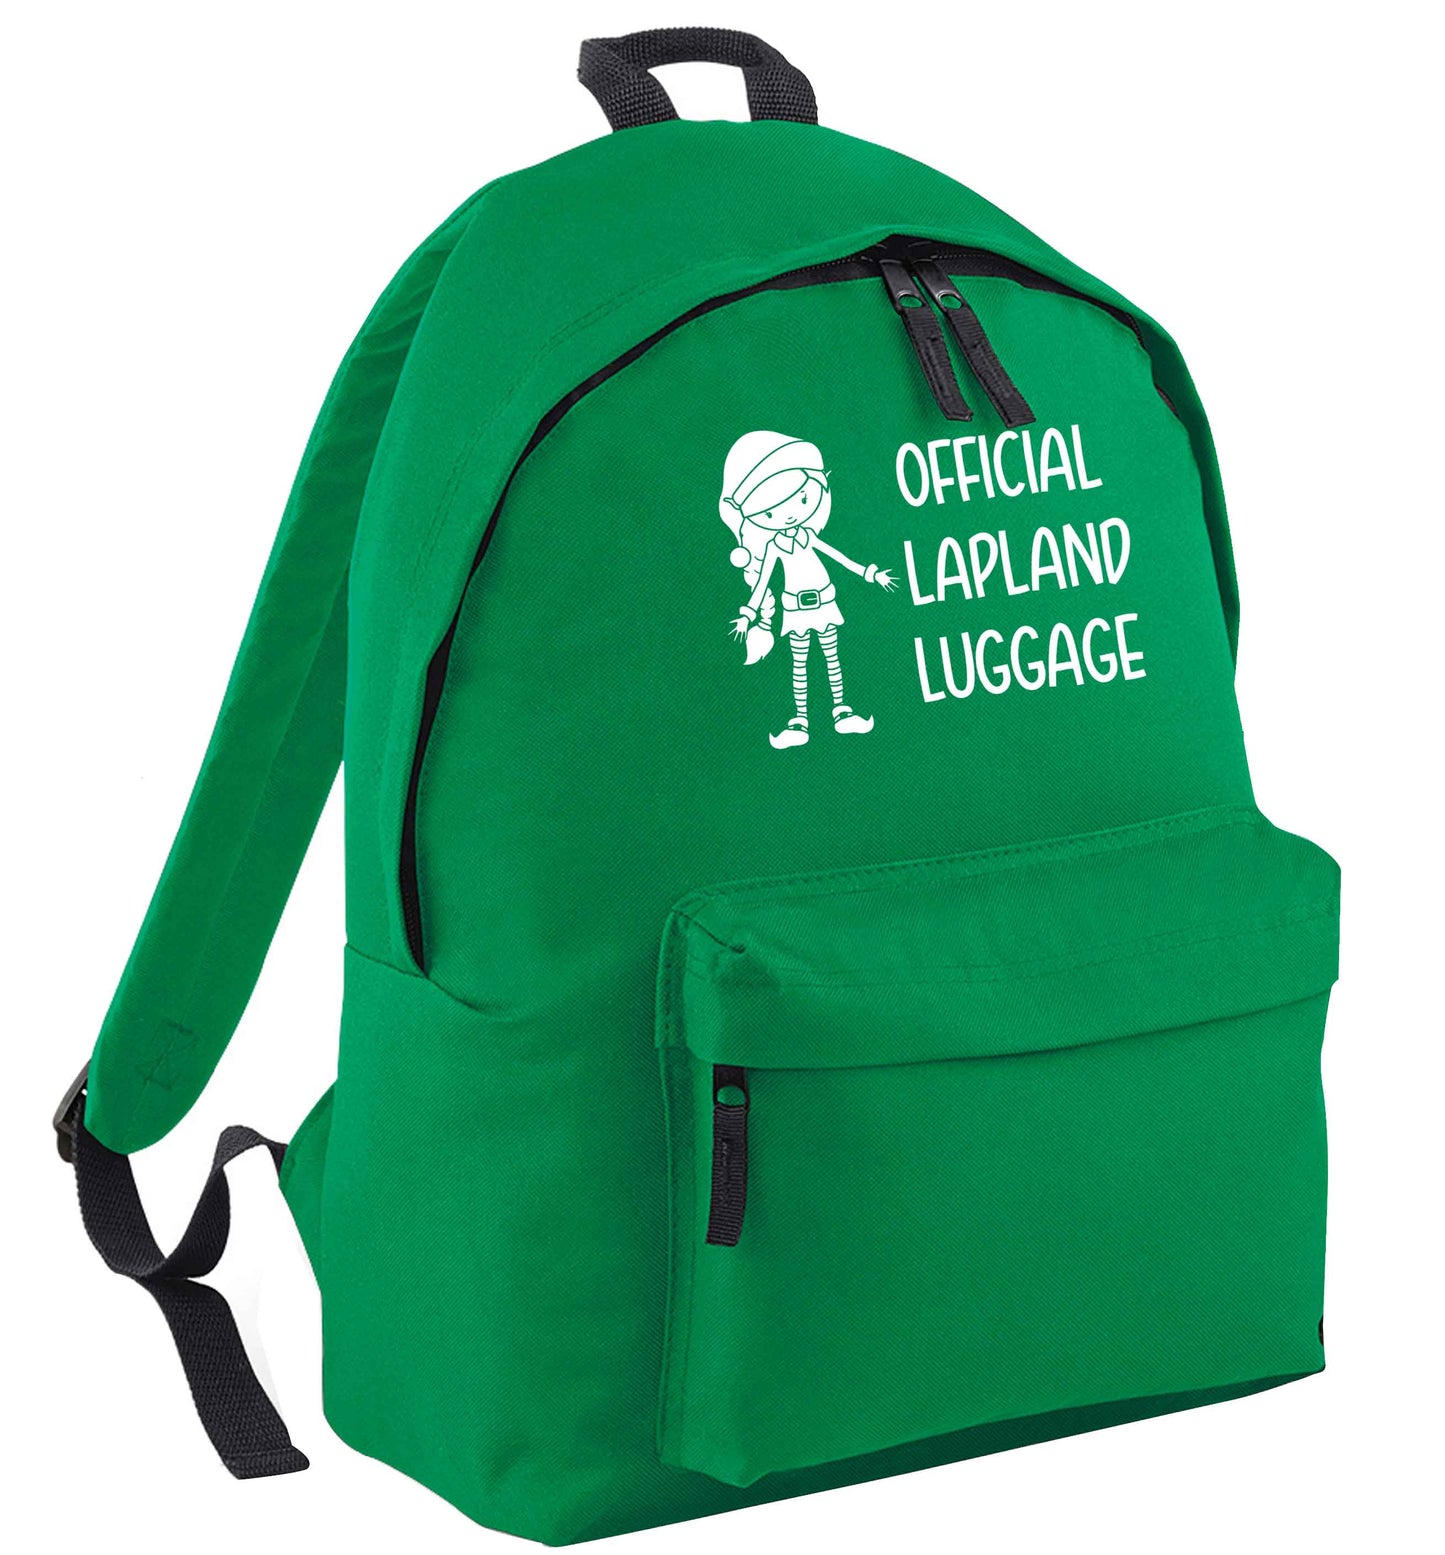 Official lapland luggage - Elf snowflake green adults backpack